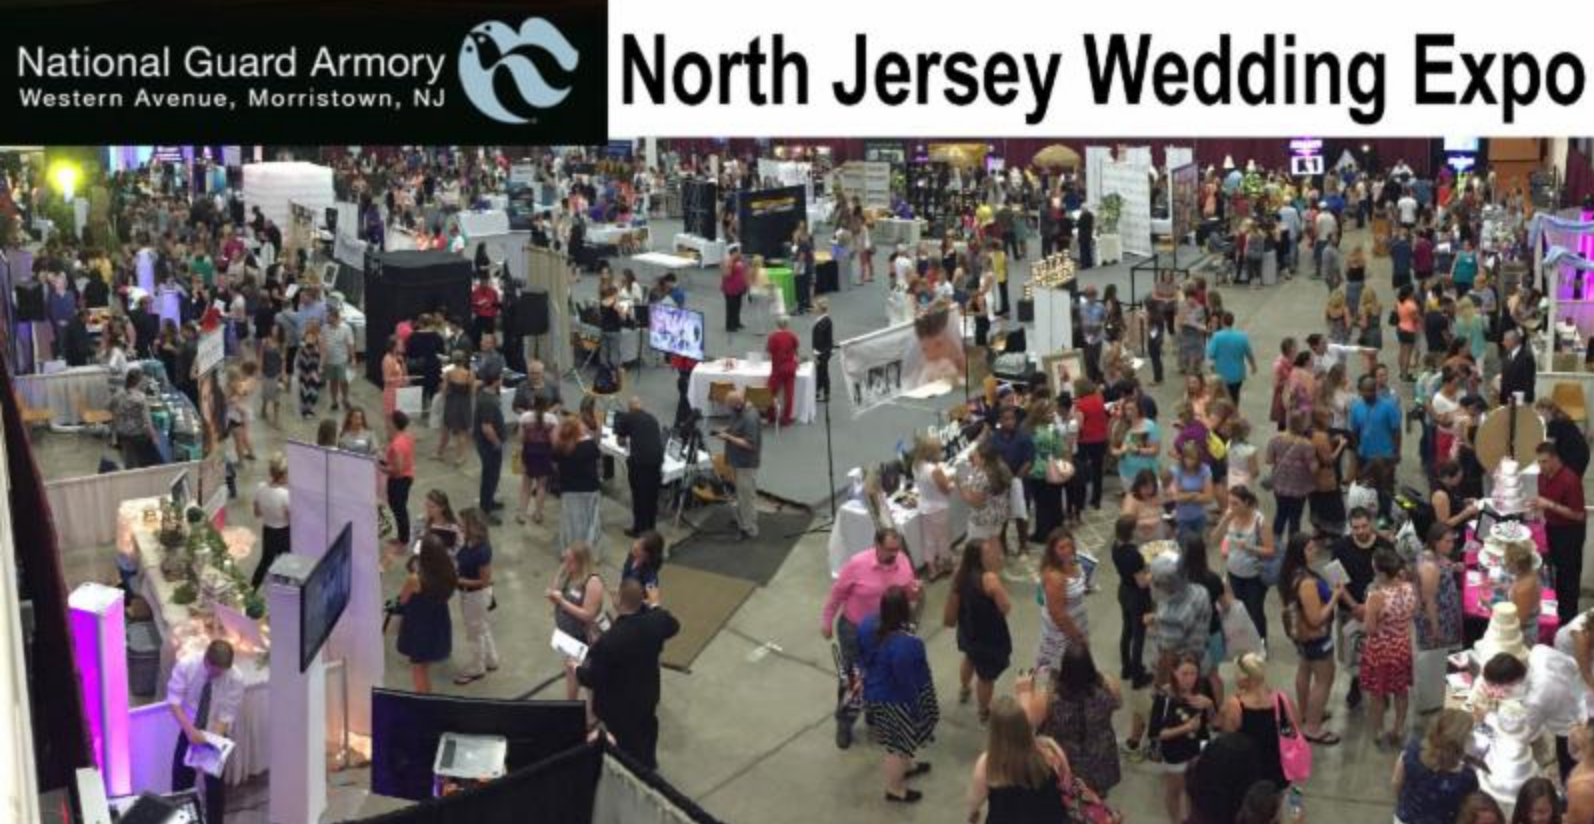 North Jersey Wedding Expo at The Morristown Armory